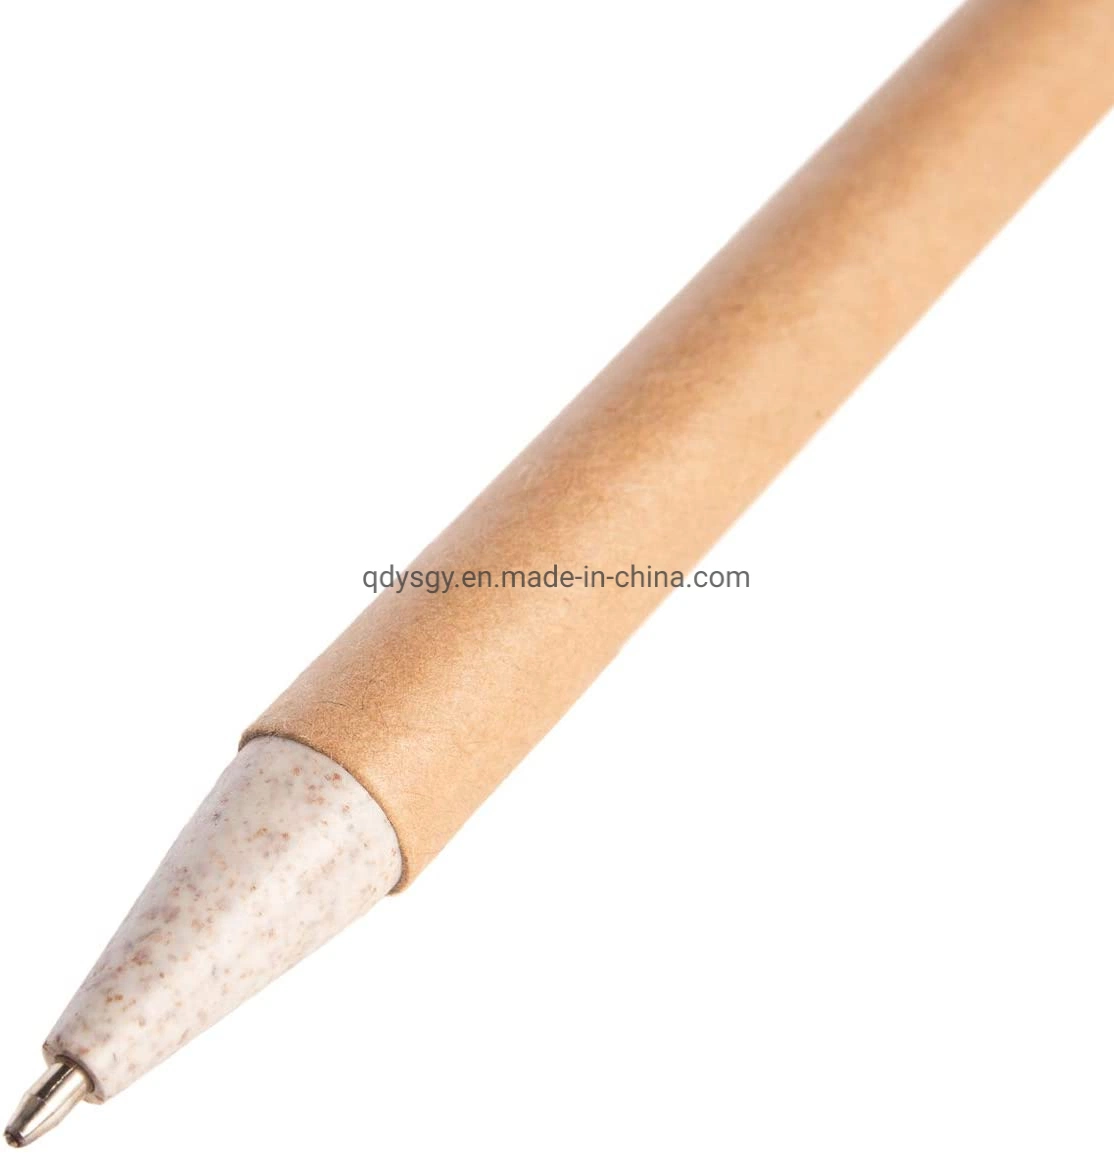 Journaling Writing Office Supplies Eco Friendly Products Ballpoint Pen